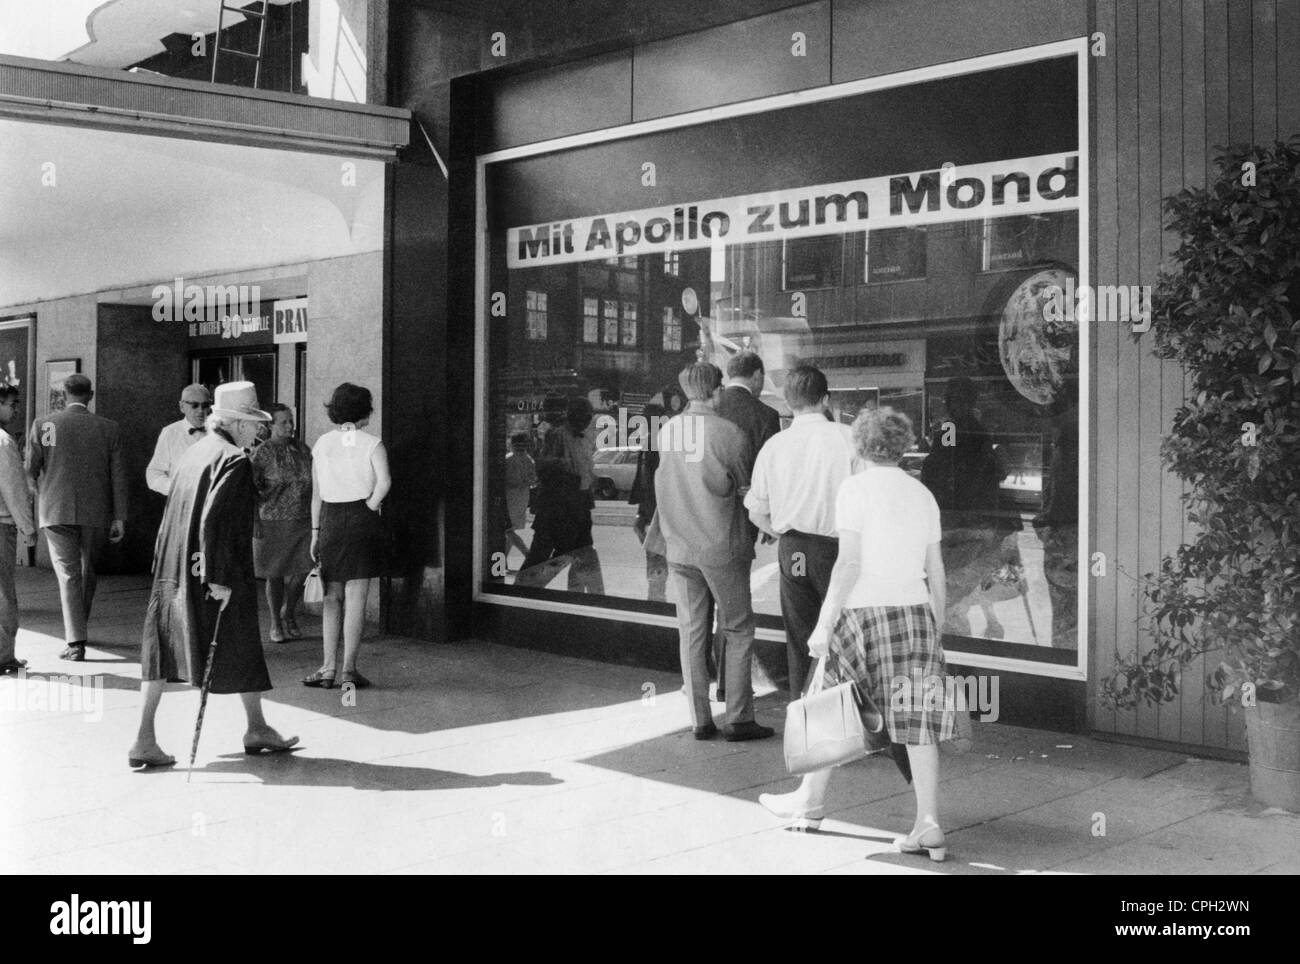 astronautics, missions, Apollo 11, launch, people watching the launch on a TV in a display window, Hamburg, 16.7.1969, 'Mit Apollo zum Mond' (With Apollo to the Moon), Additional-Rights-Clearences-Not Available Stock Photo